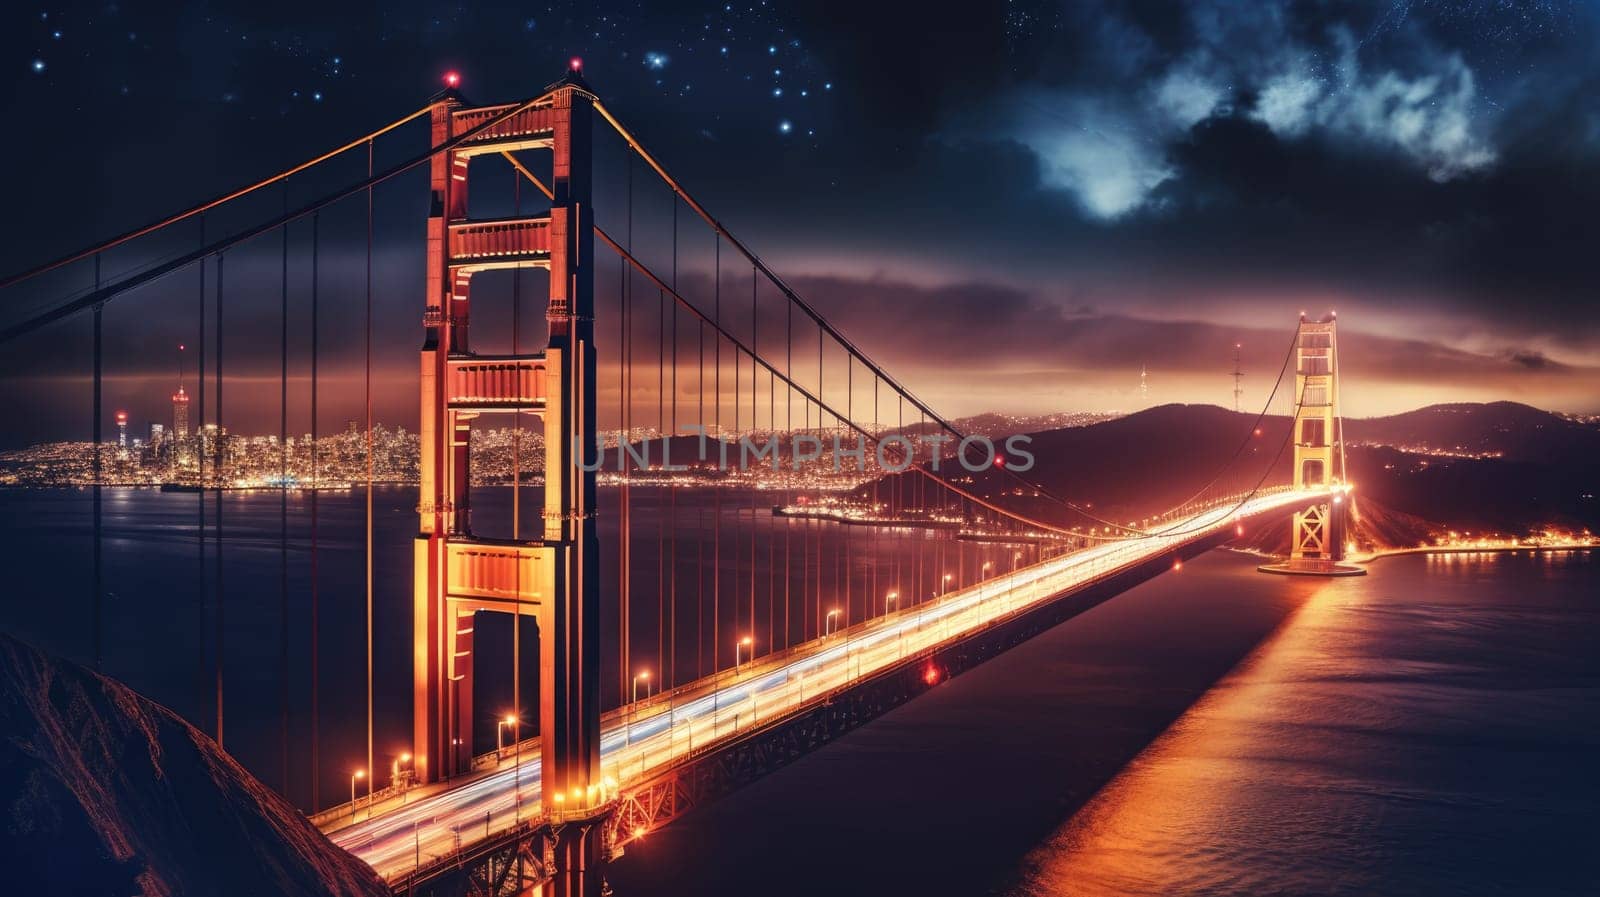 Golden Gate Bridge at night, a mesmerizing sight for photography enthusiasts by JuliaDorian